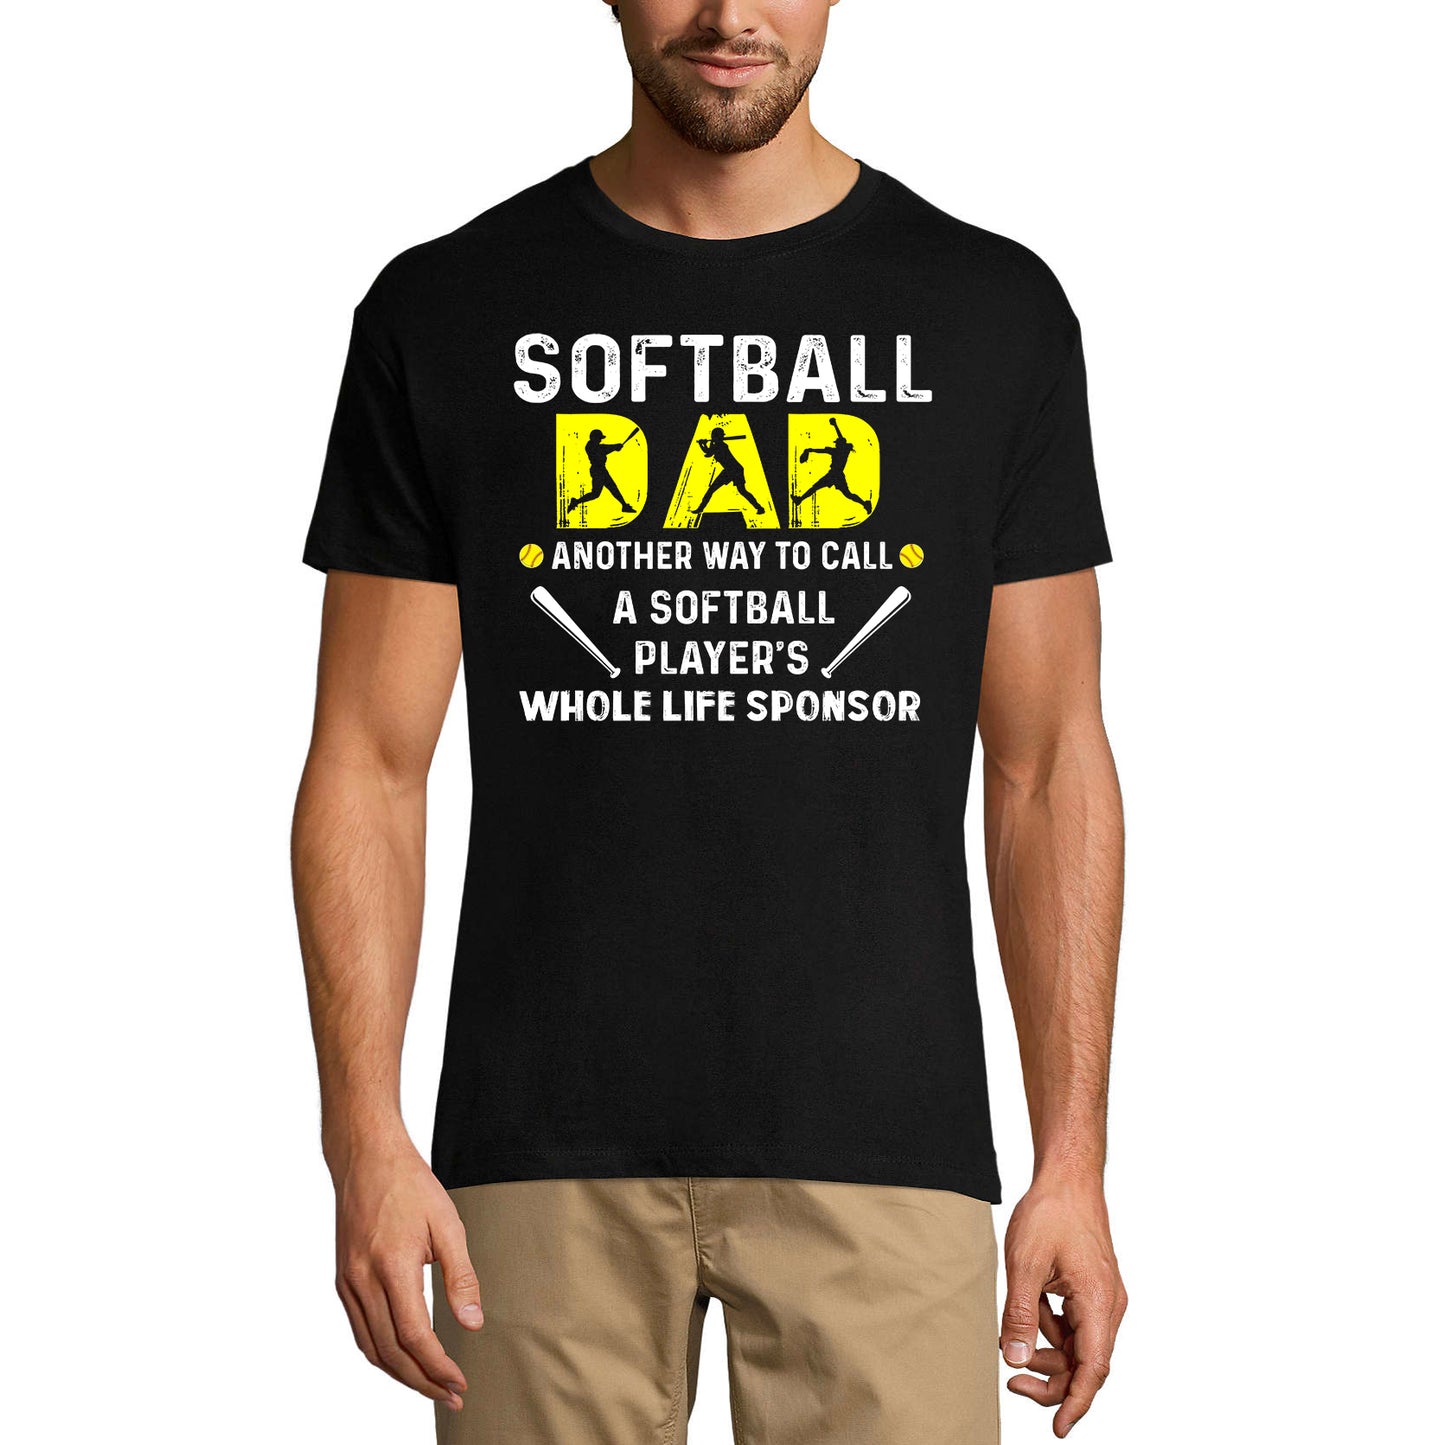 ULTRABASIC Men's Graphic T-Shirt Softball Dad Another Way To Call - Funny Quote